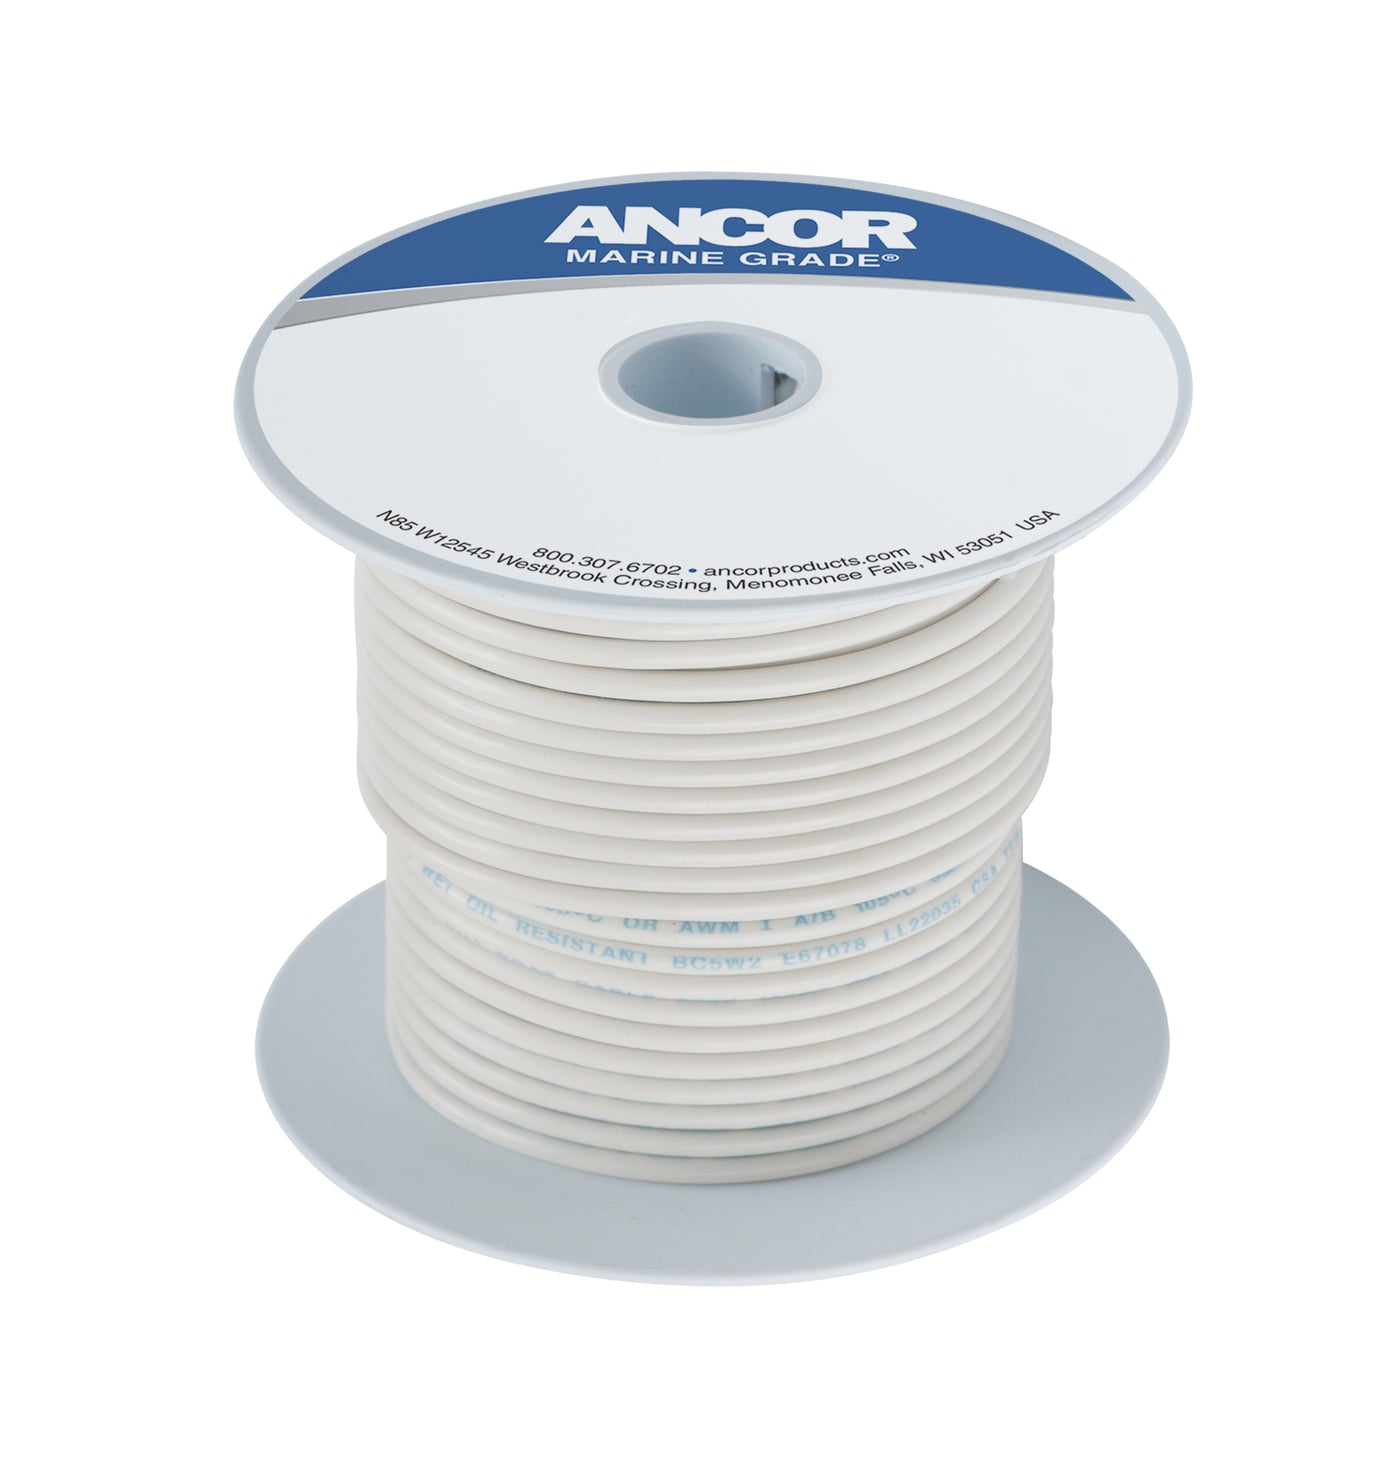 Ancor 112750 Tinned Copper Wire, 6 AWG (13mm²), White - 500ft